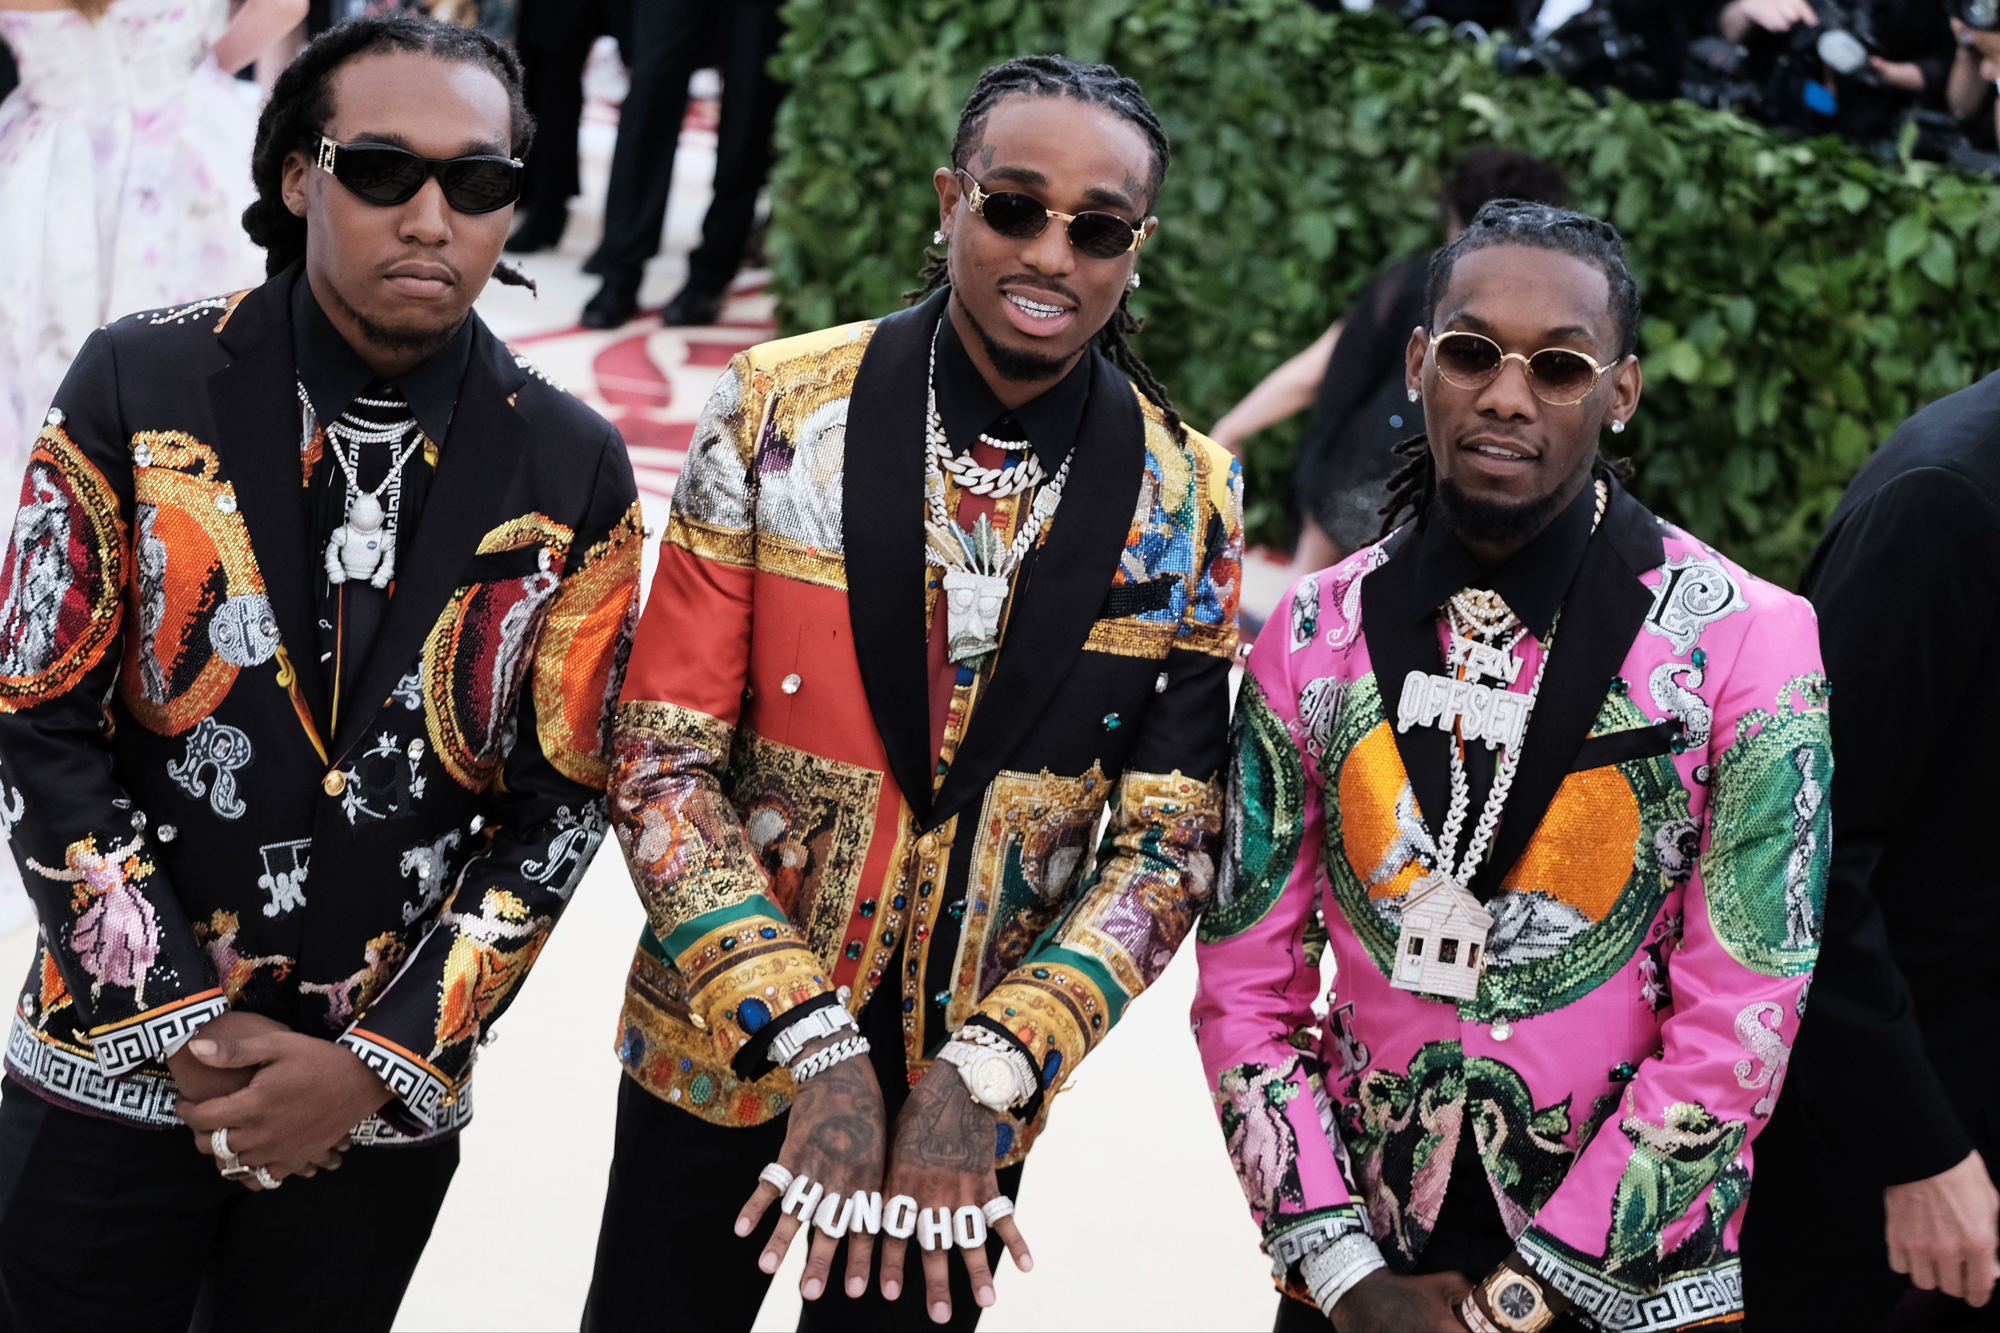 How Takeoff, his uncle Quavo and cousin Offset, formed Migos